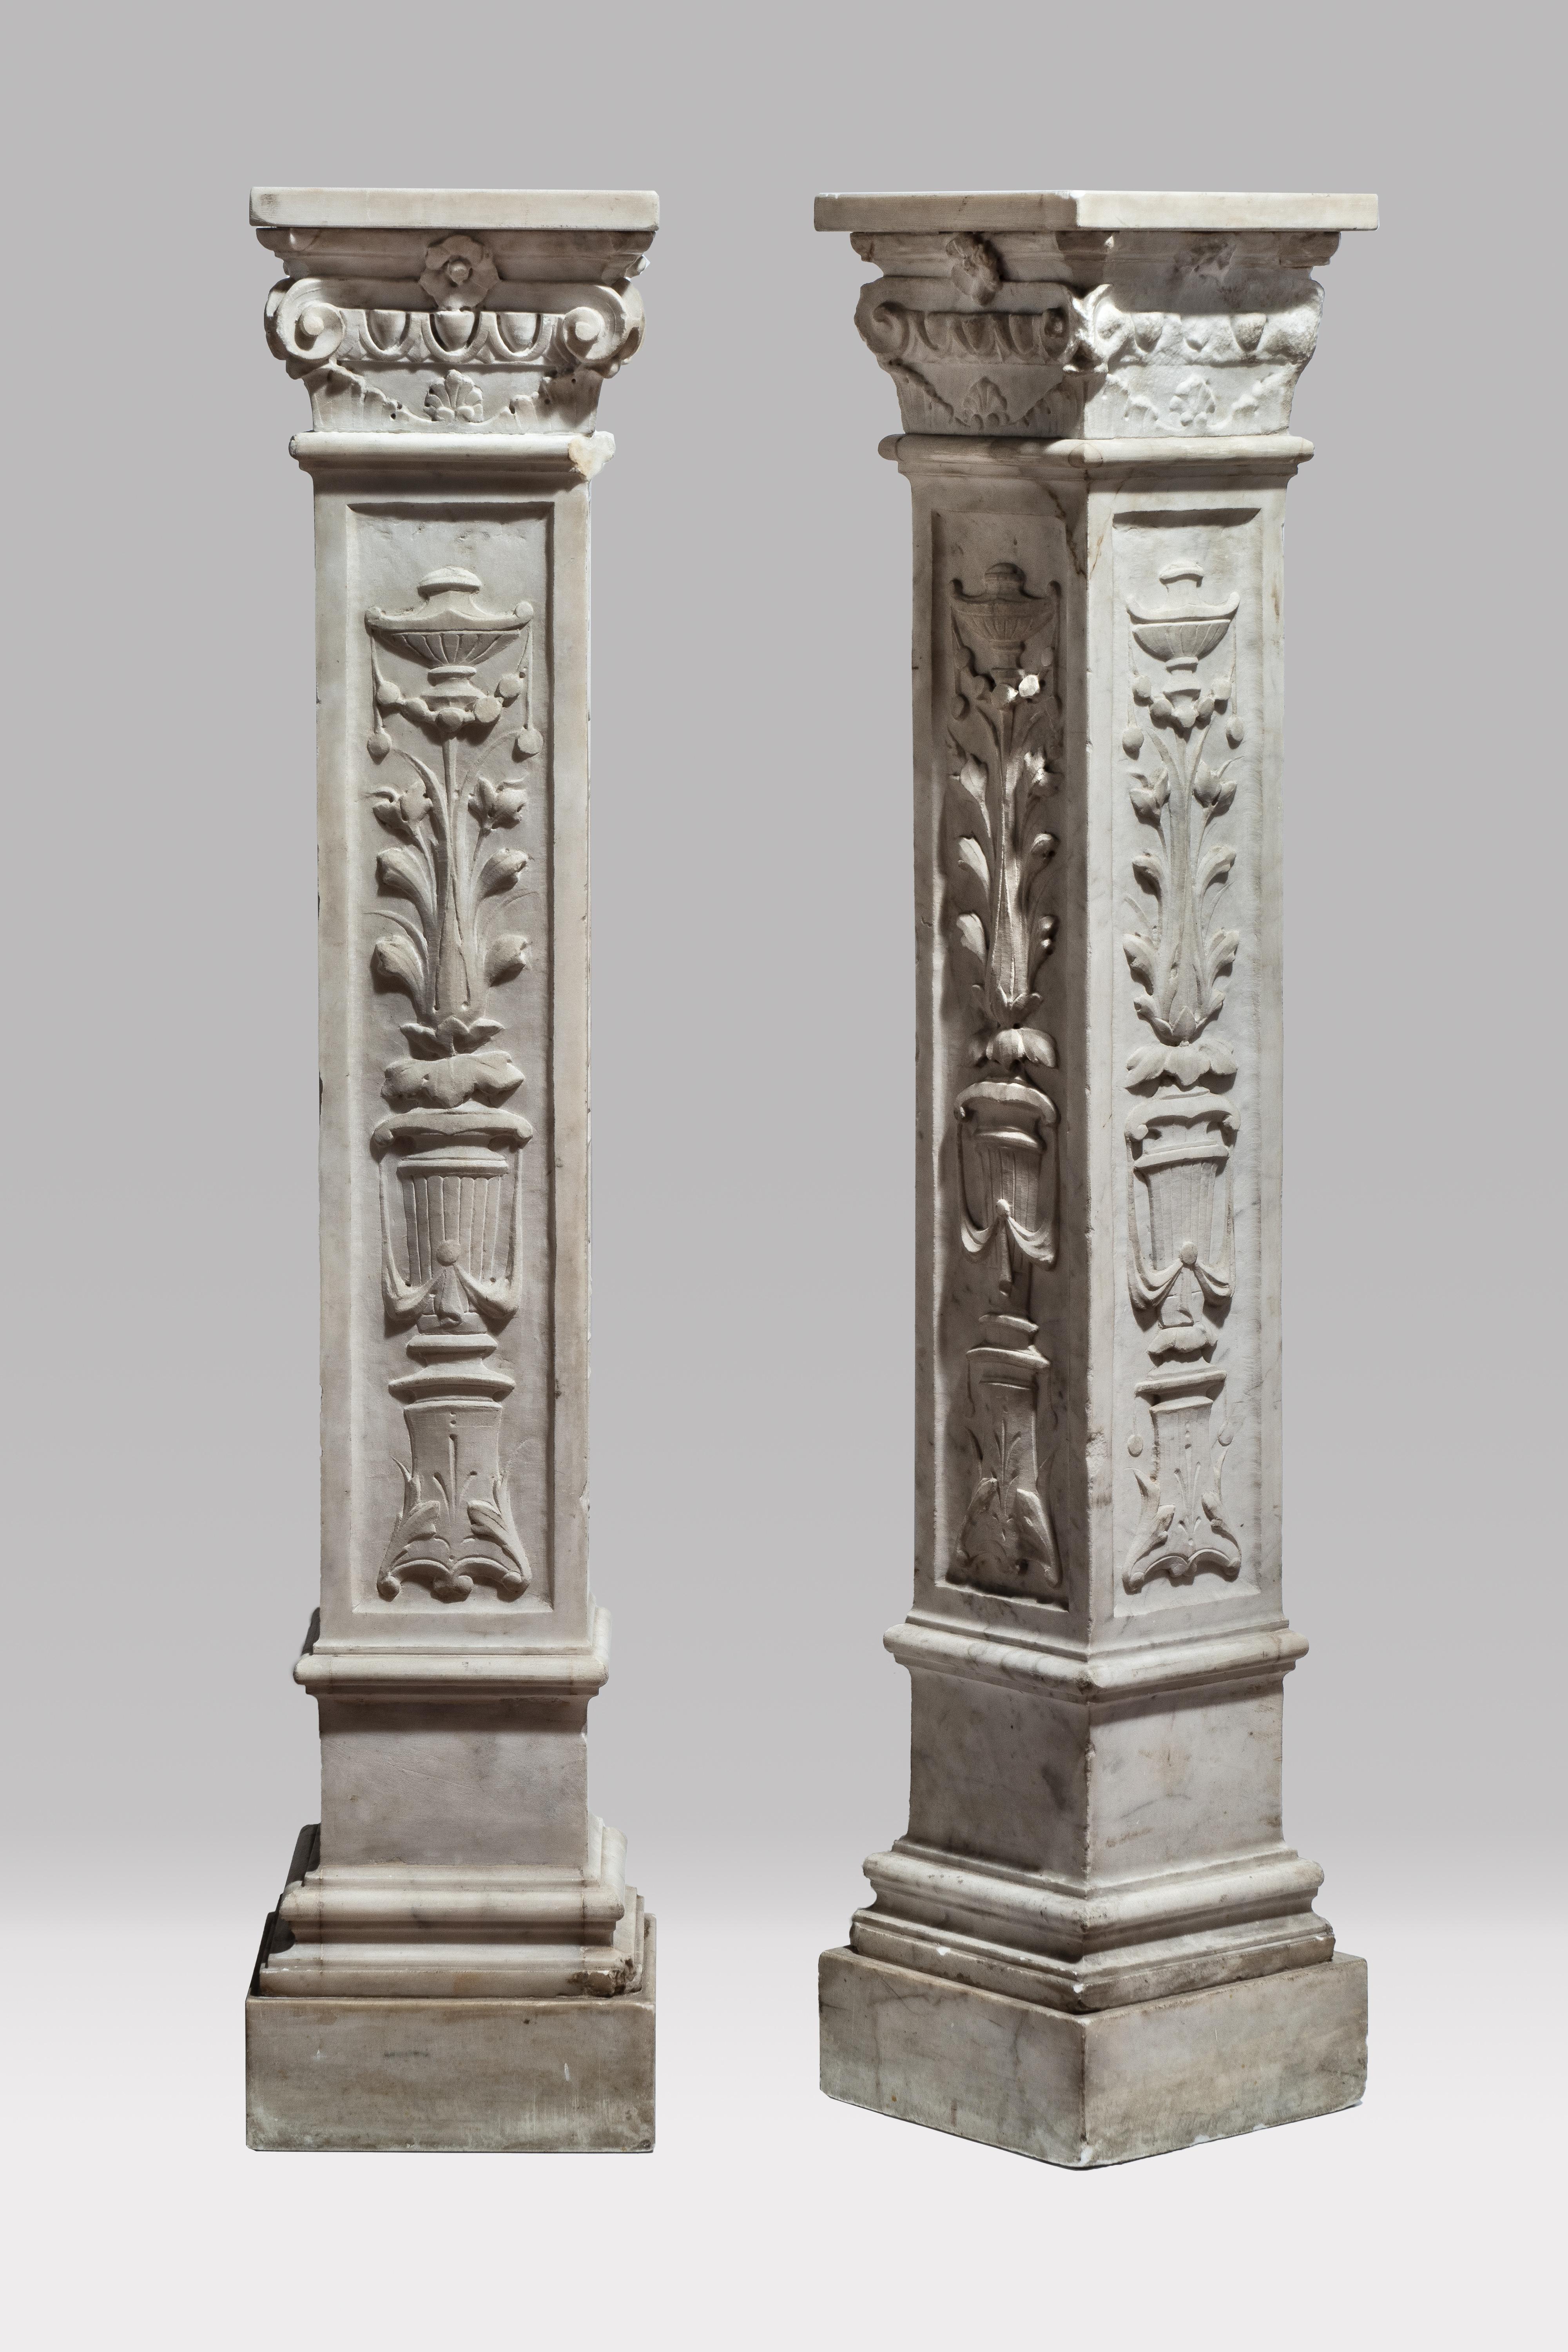 PAIR OF COLUMNS/PLINTHS WITH FLORAL DECORATIONS
Italy, 19th Century
marble
101 x 21 x 21 cm
39 3/4 x 8 1/4 x 8 1/4 in